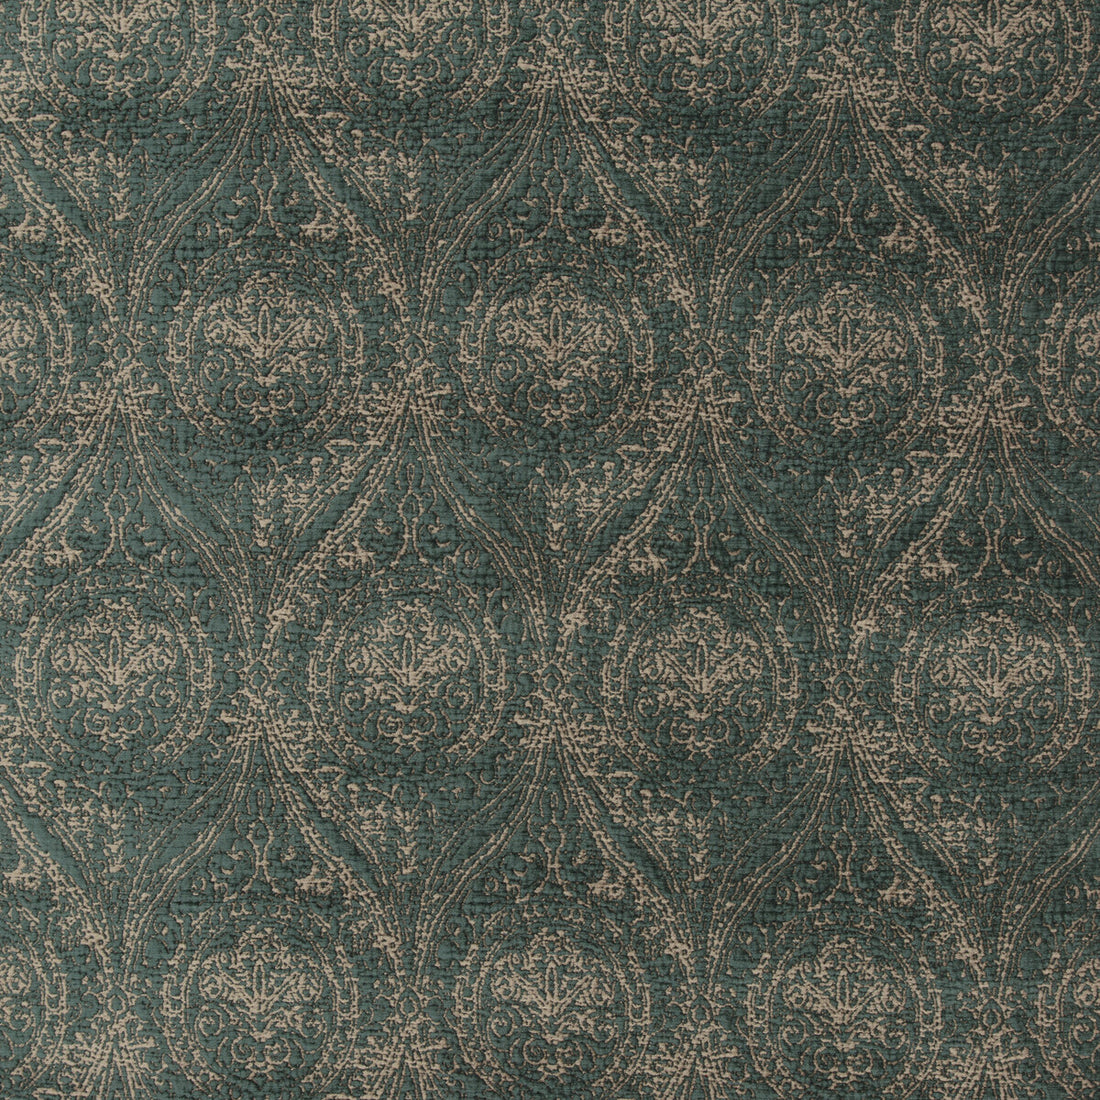 Wolsey fabric in jade color - pattern BF10654.1.0 - by G P &amp; J Baker in the Historic Royal Palaces collection